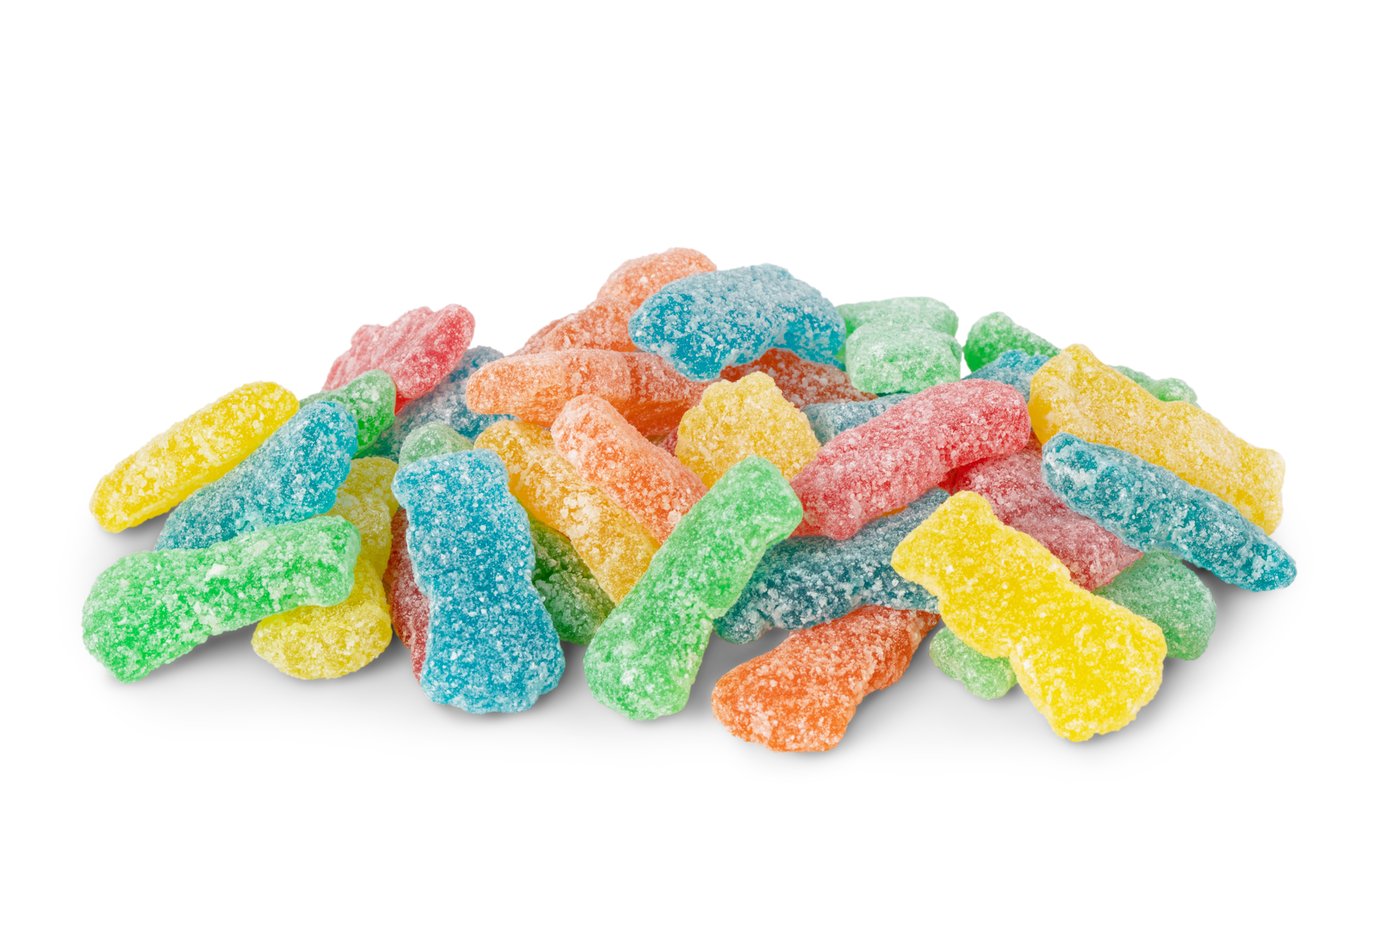 Sour Patch Kids image zoom